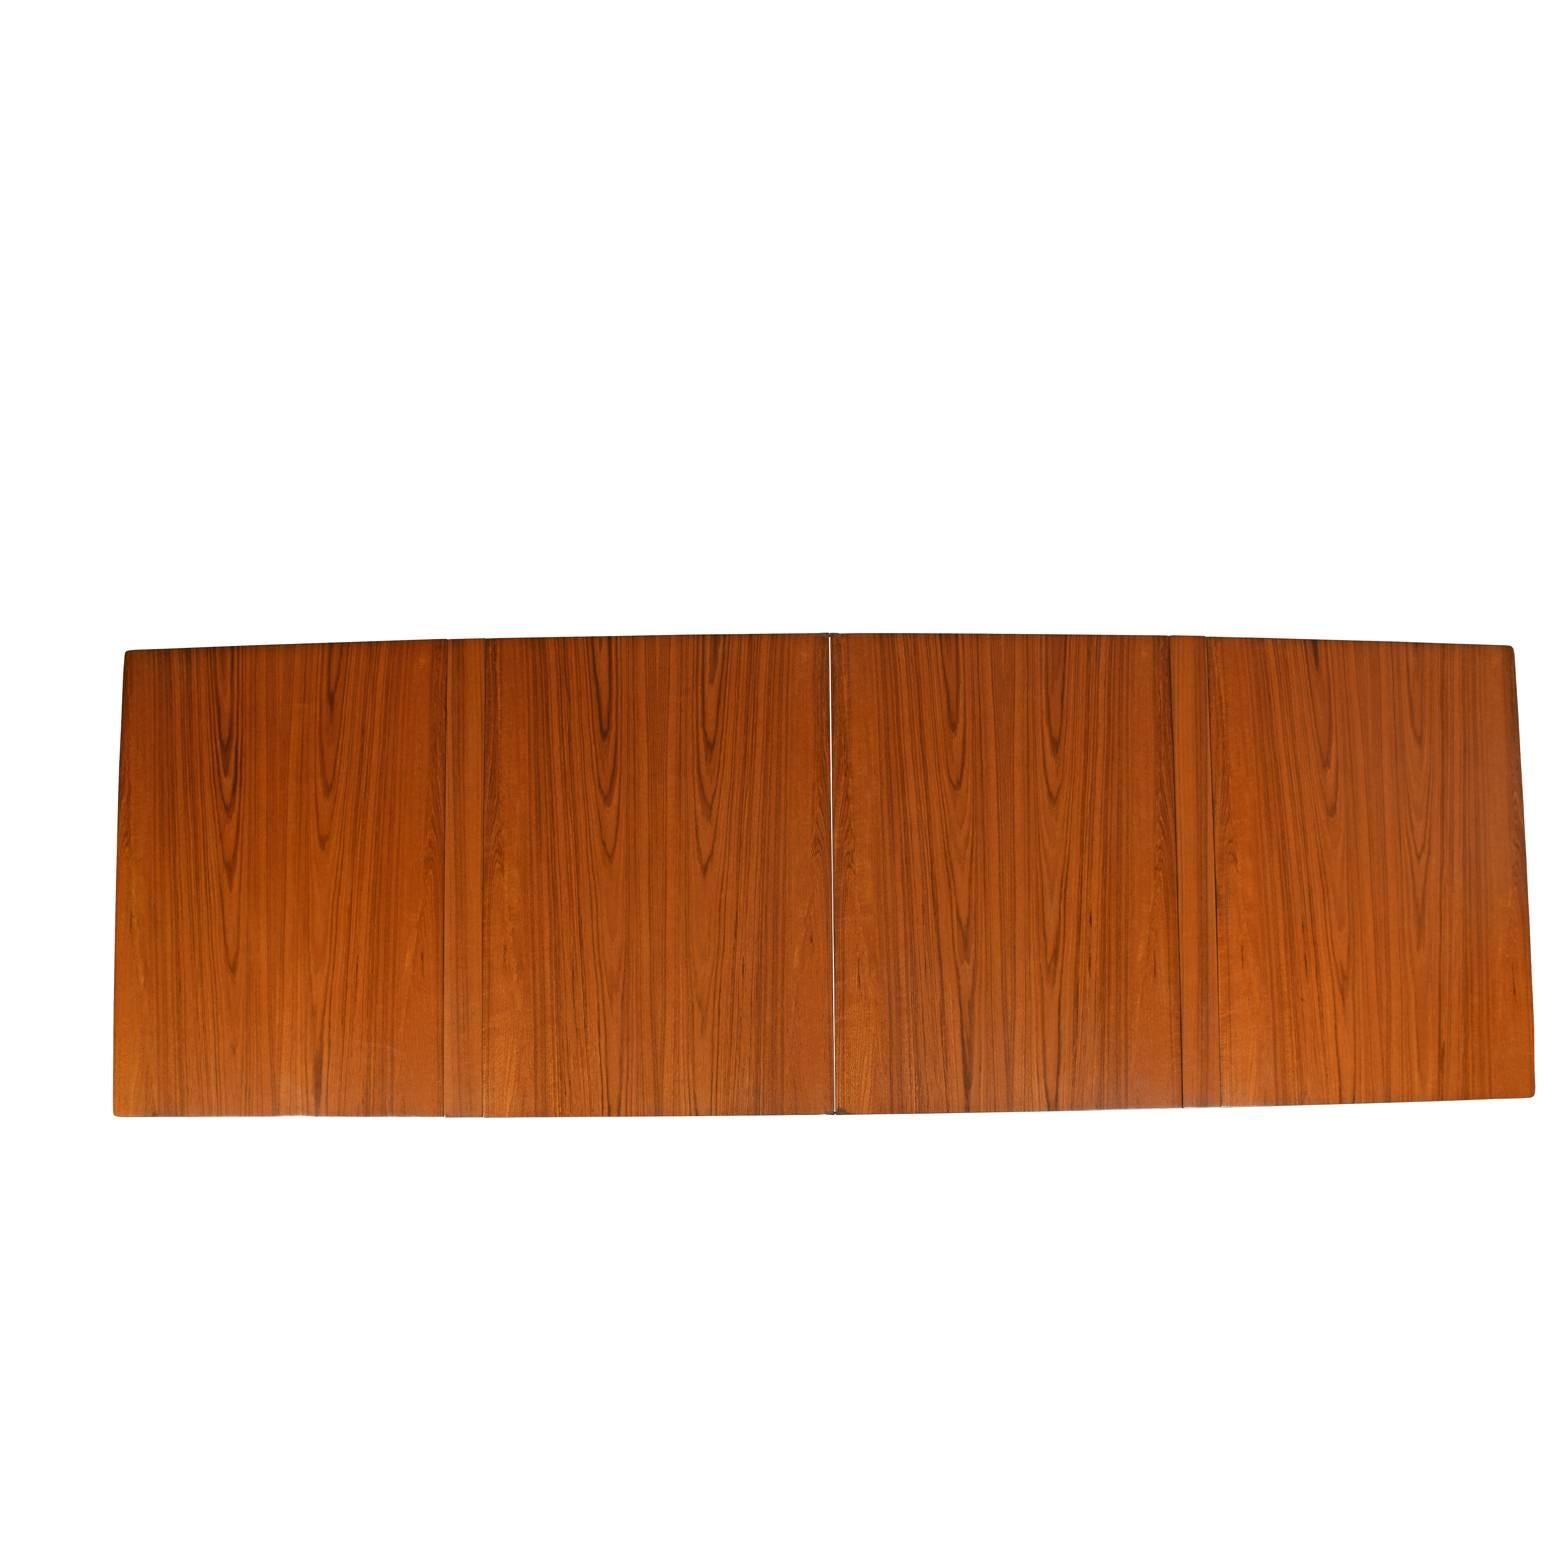 Beech Signed Bruno Mathsson 'Maria' Expandable Dining Table for Karl Mathsson, 1961